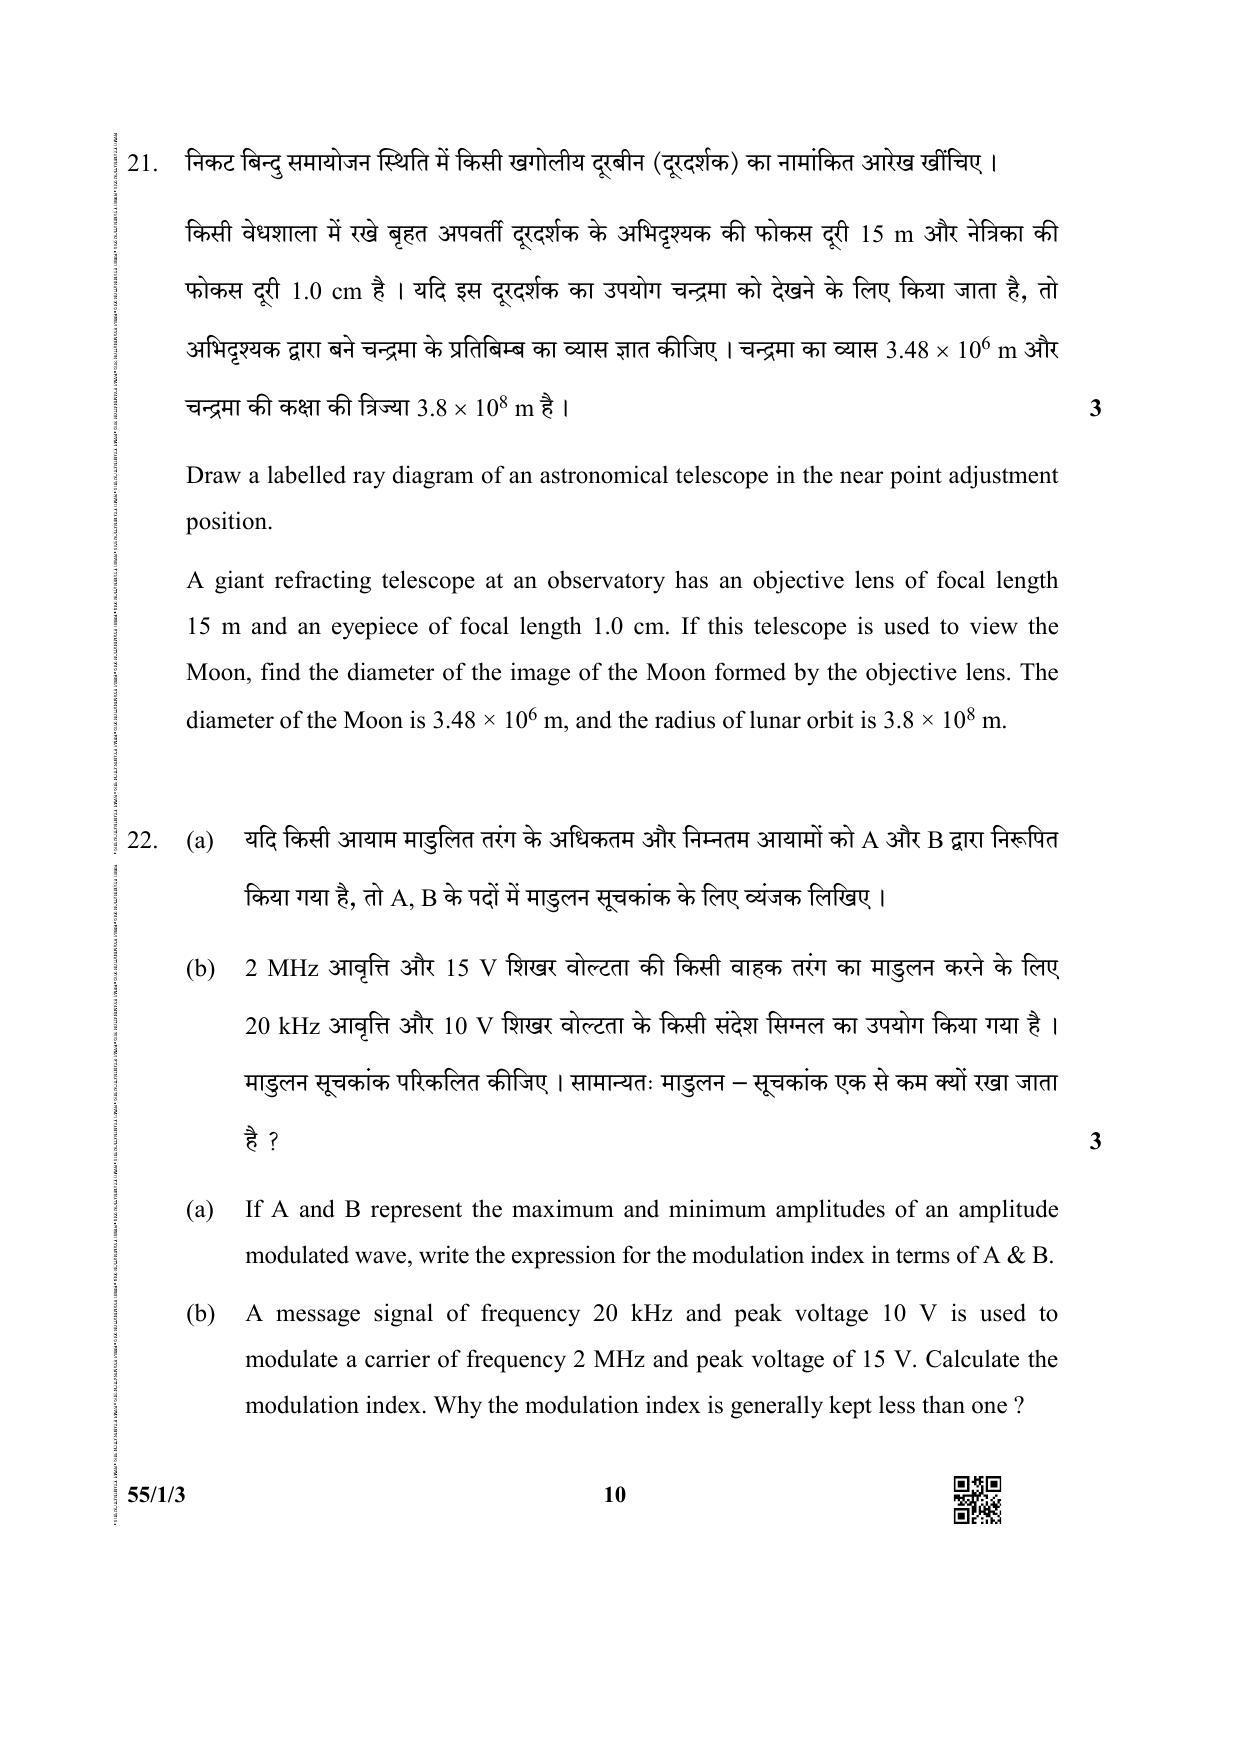 CBSE Class 12 55-1-3 (Physics) 2019 Question Paper - Page 10